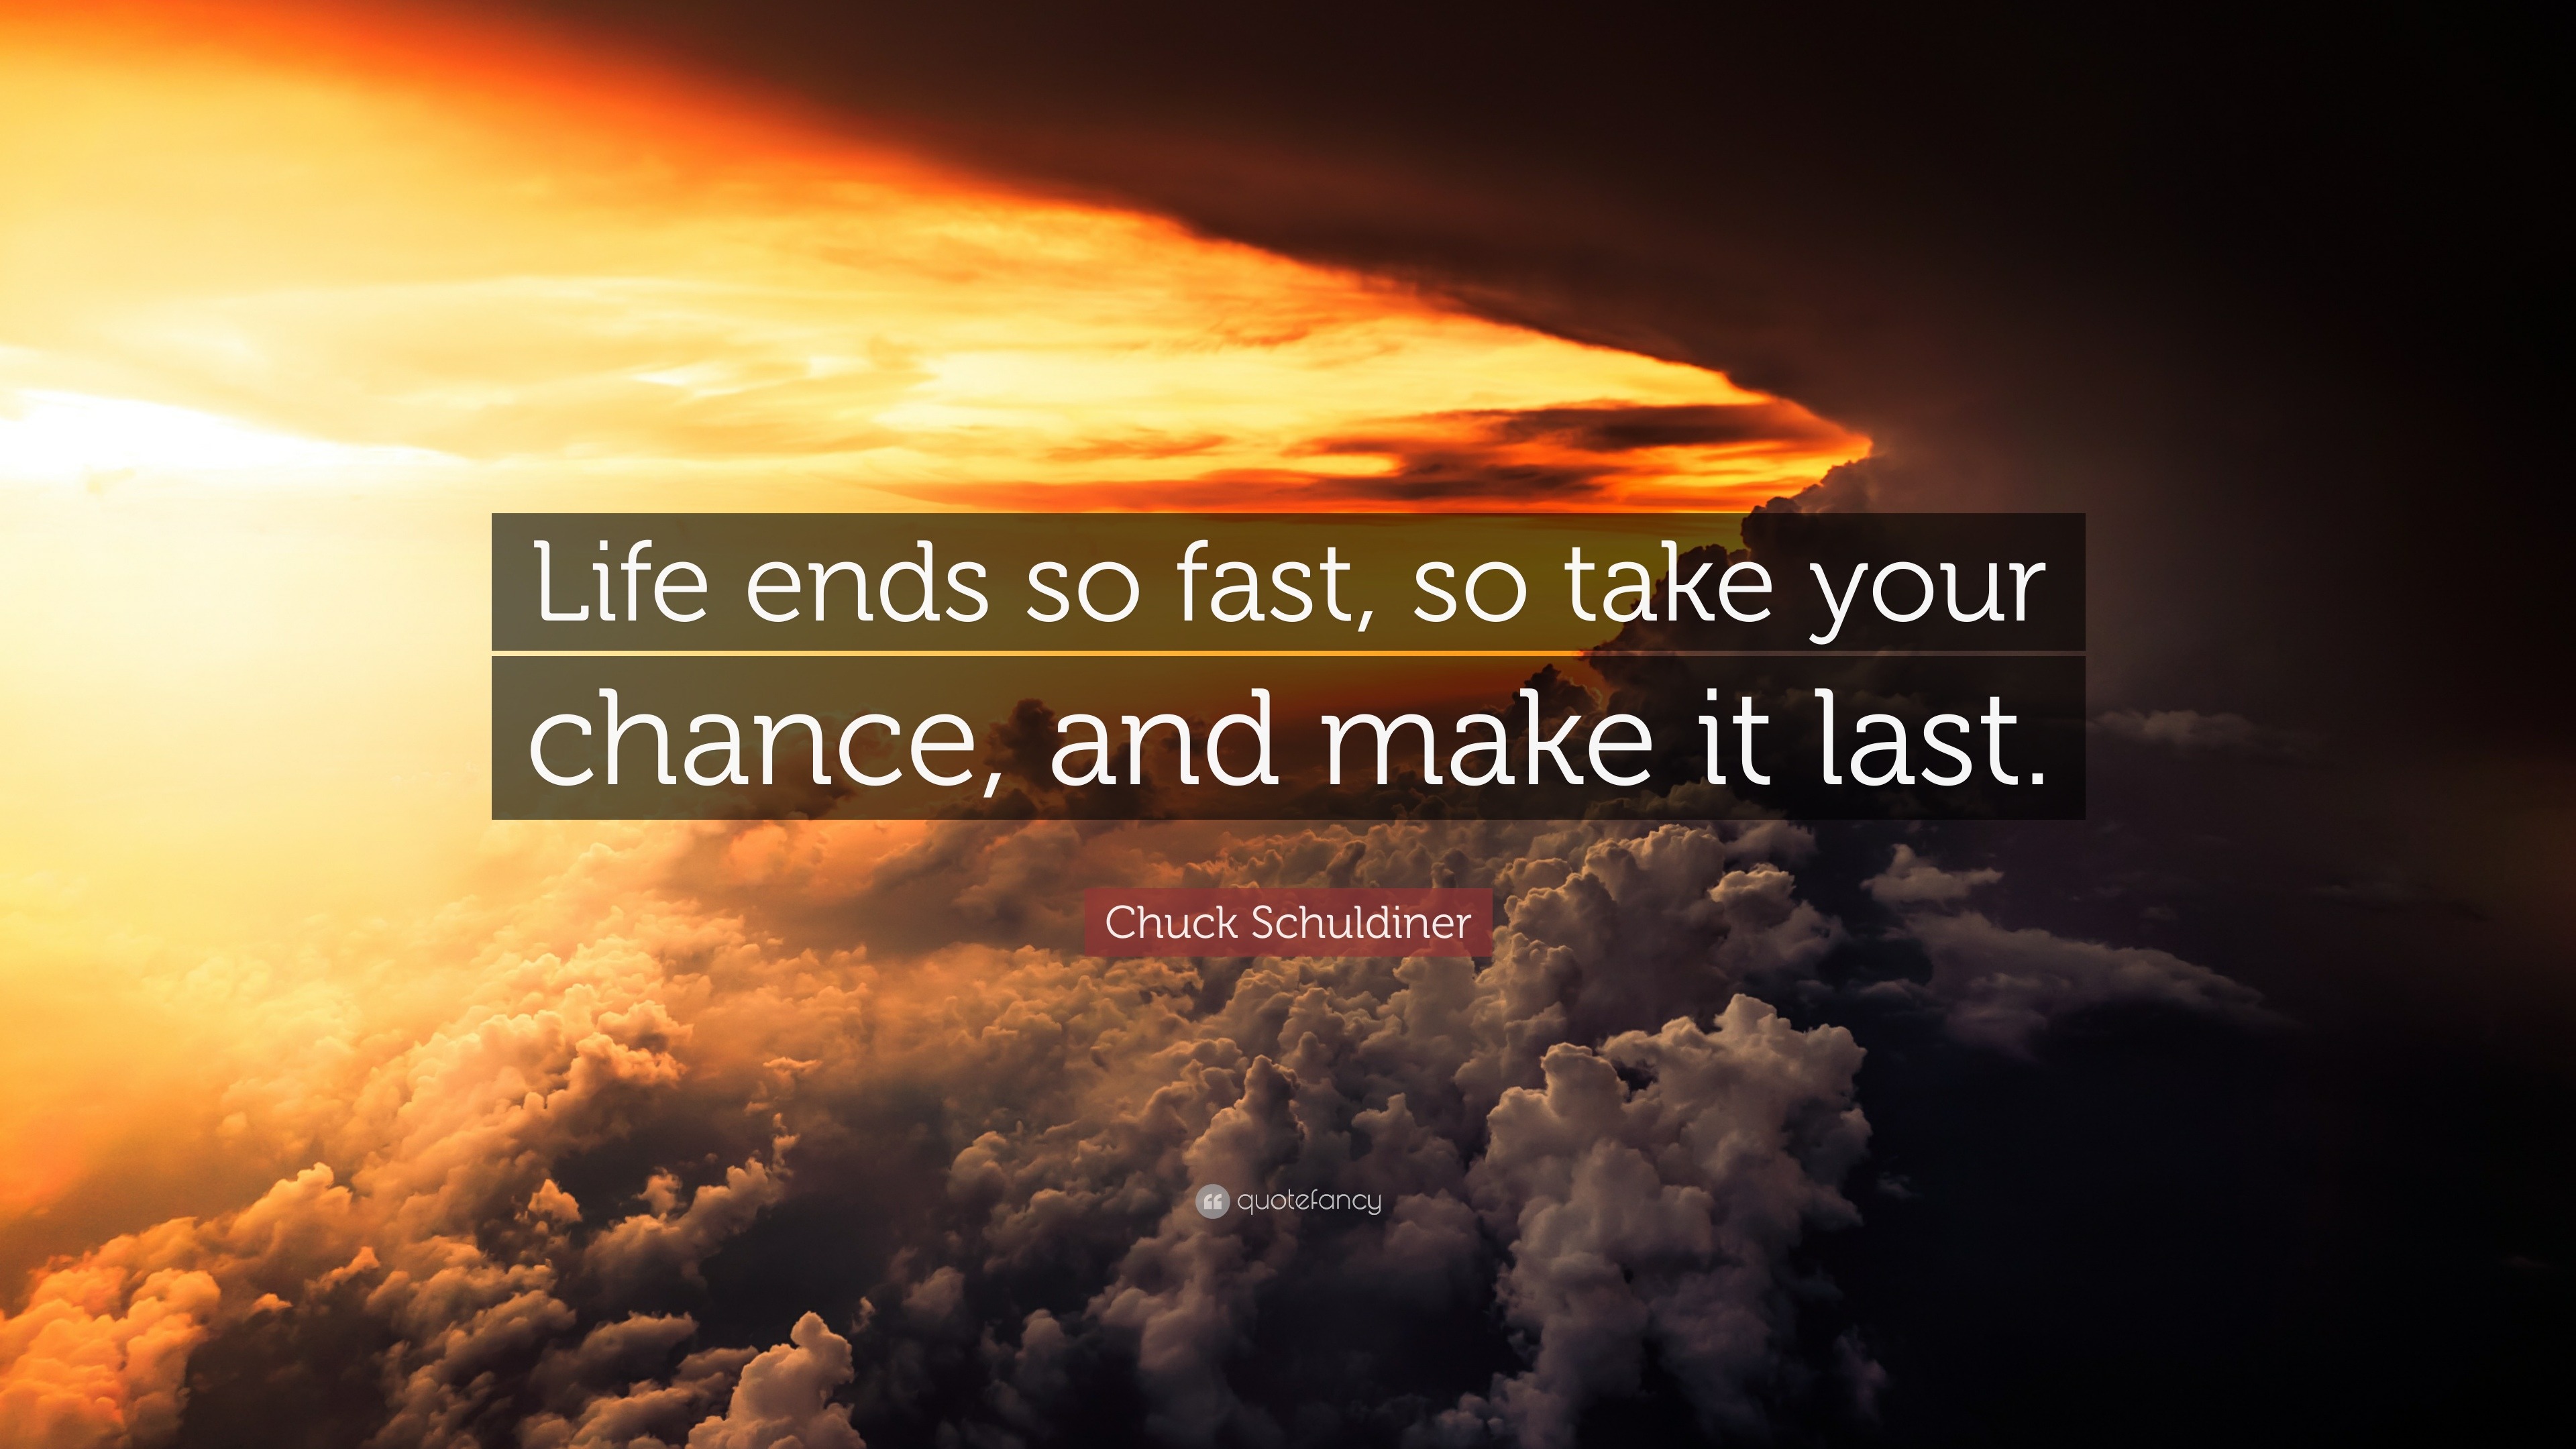 Chuck Schuldiner Quote: “Life ends so fast, so take your chance, and